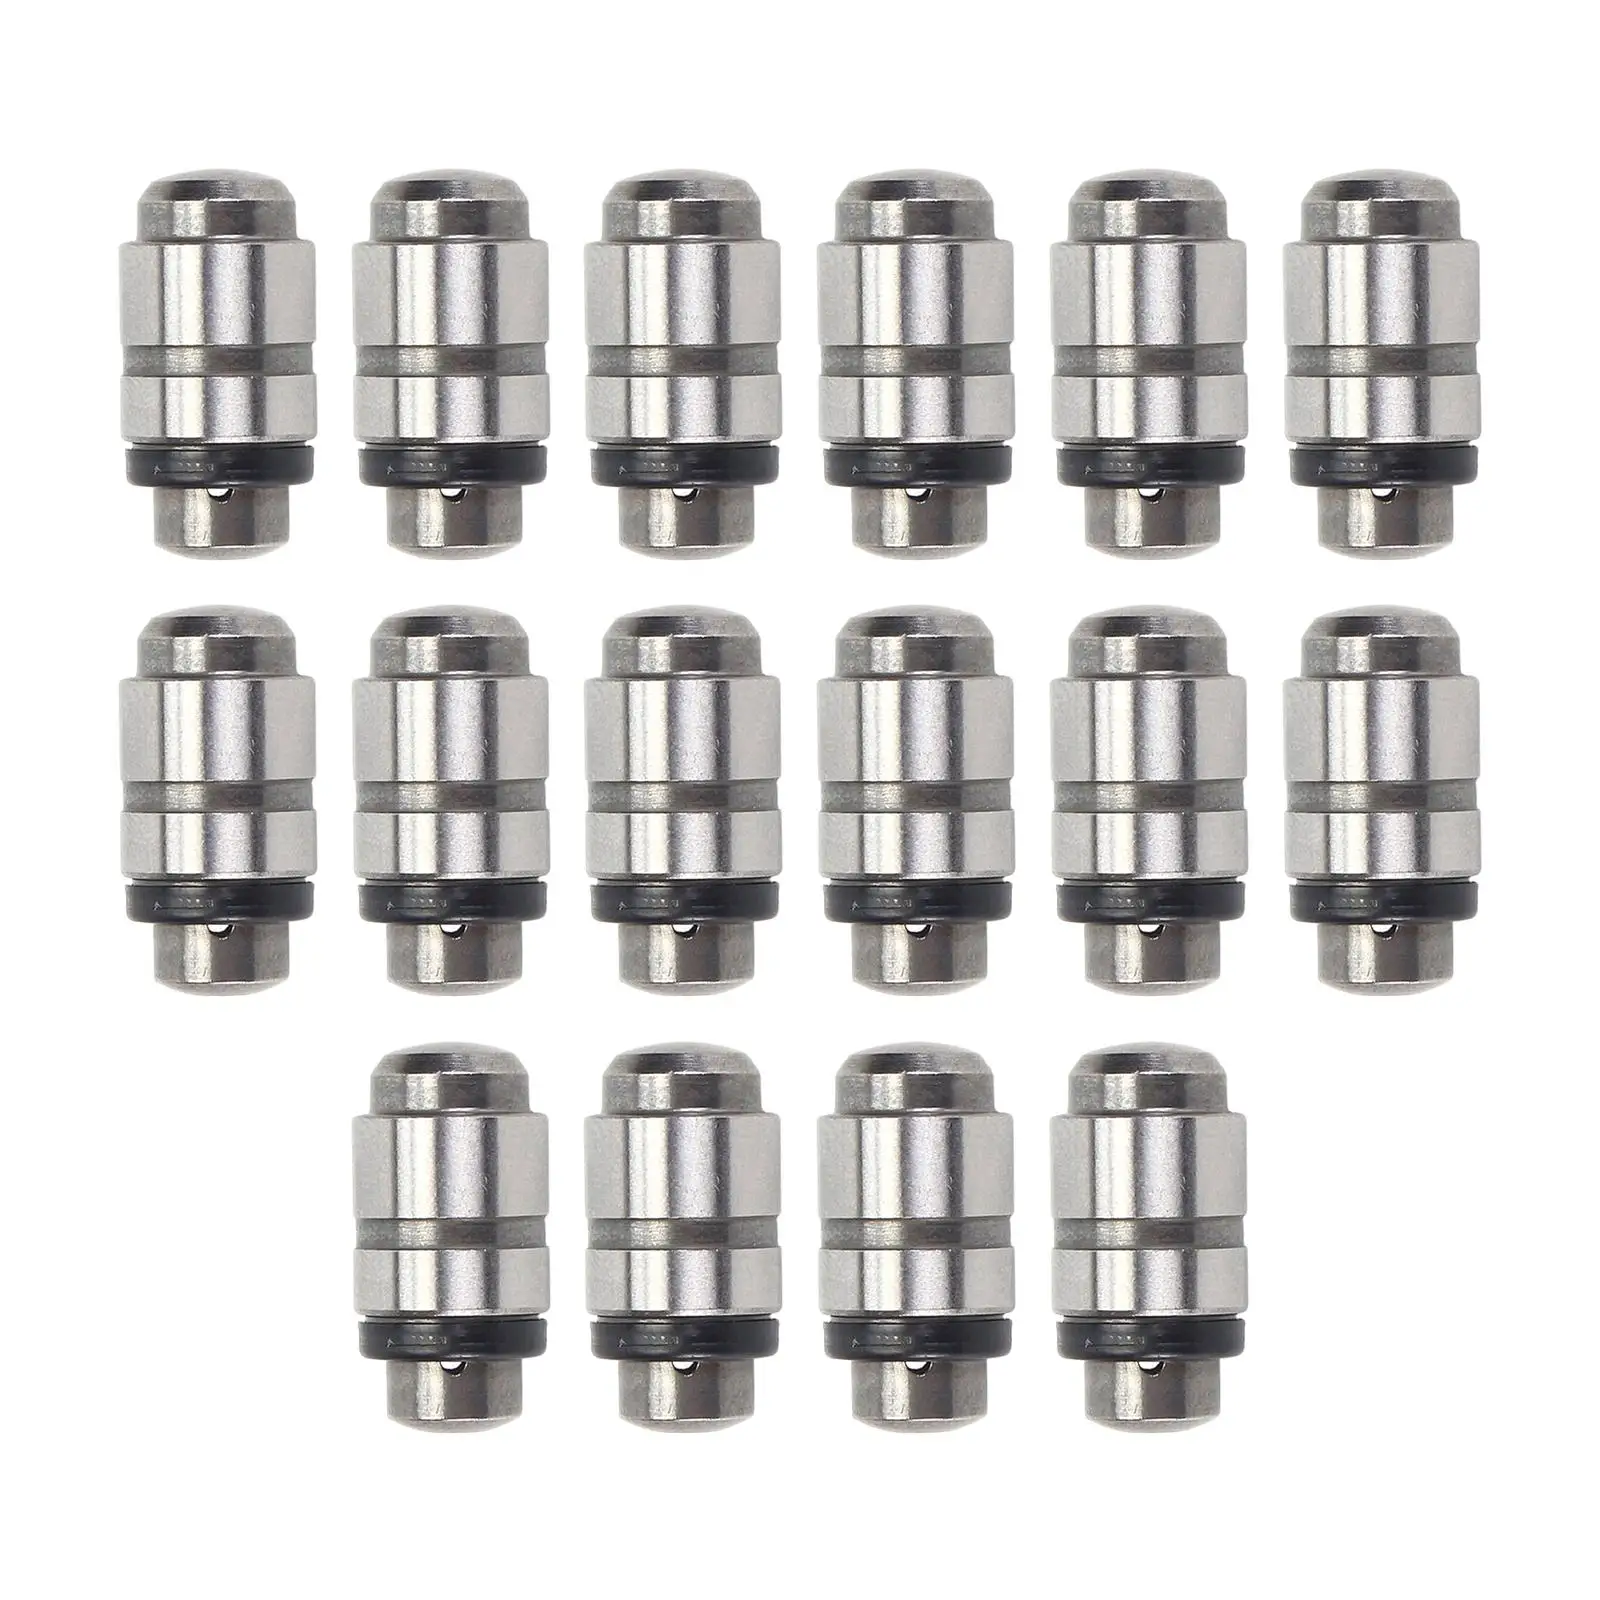 16-In-Pack Valve Tappets Lifters Kit Vehicle Parts Iron Assemblies Replaces for Mitsubishi 3.5L 3.8L 2131753 Car Supplies